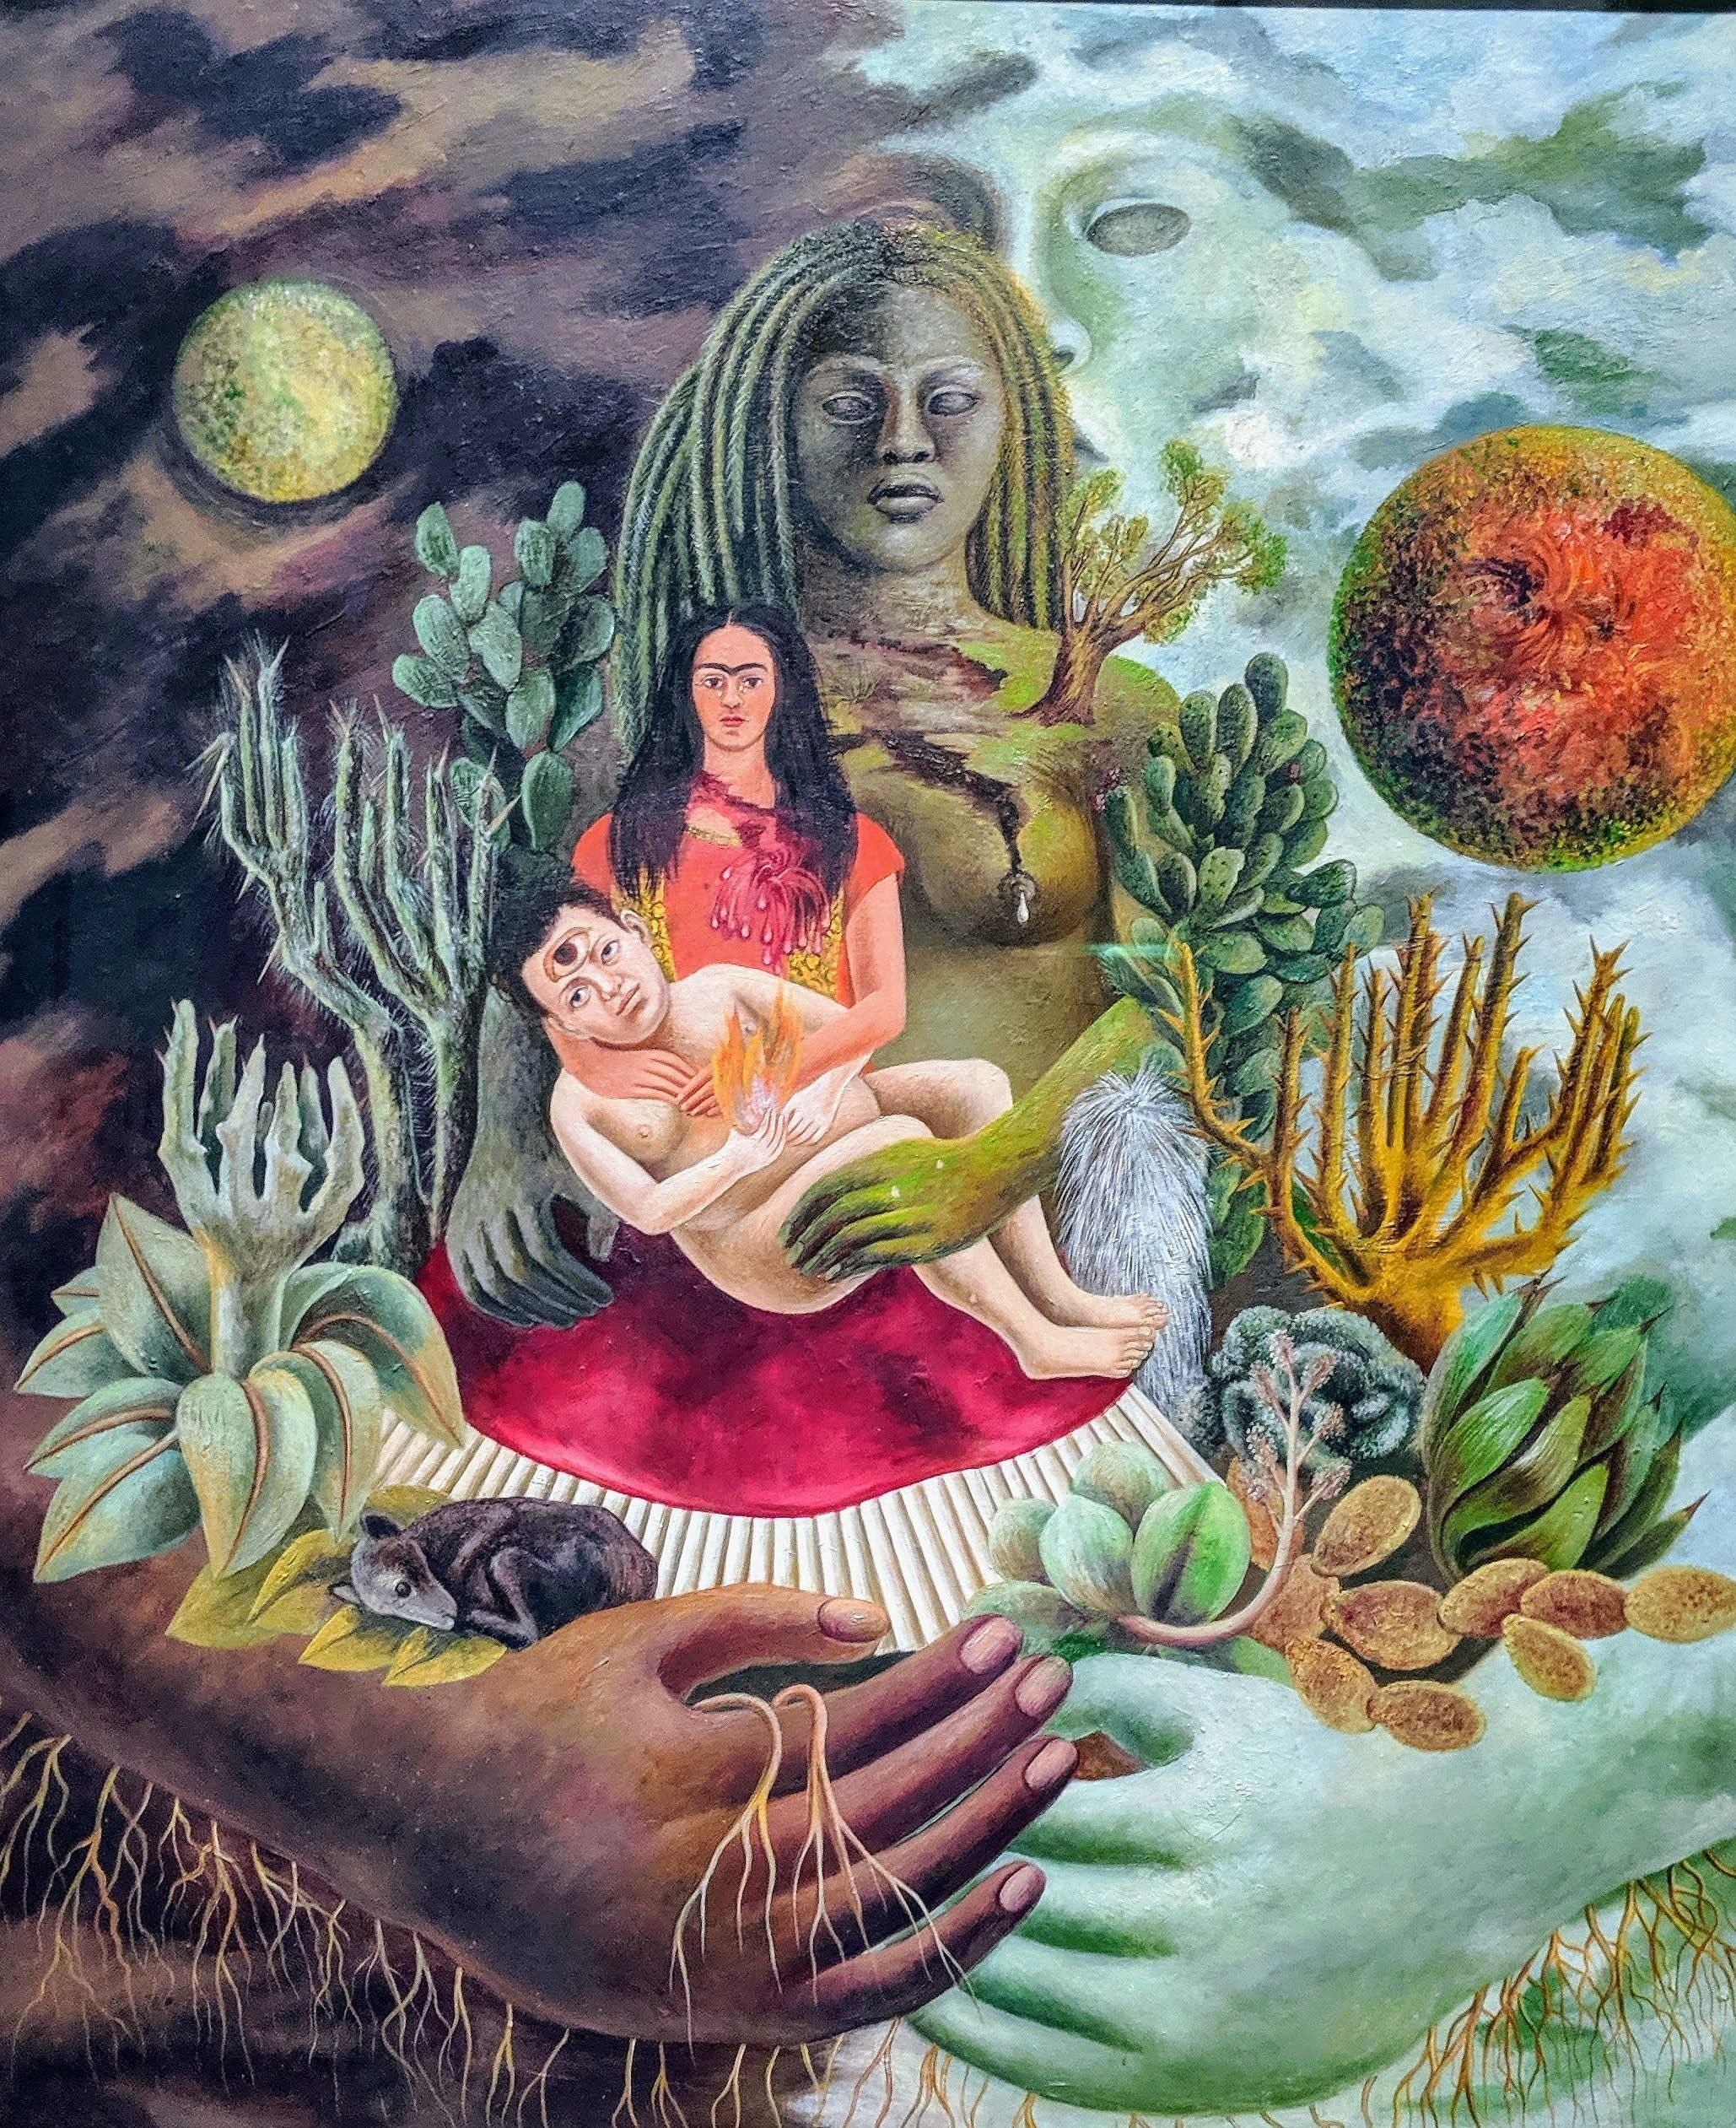 A painting of a woman holding a baby, with a figure of a face in the clouds and a moon in the sky. - Frida Kahlo